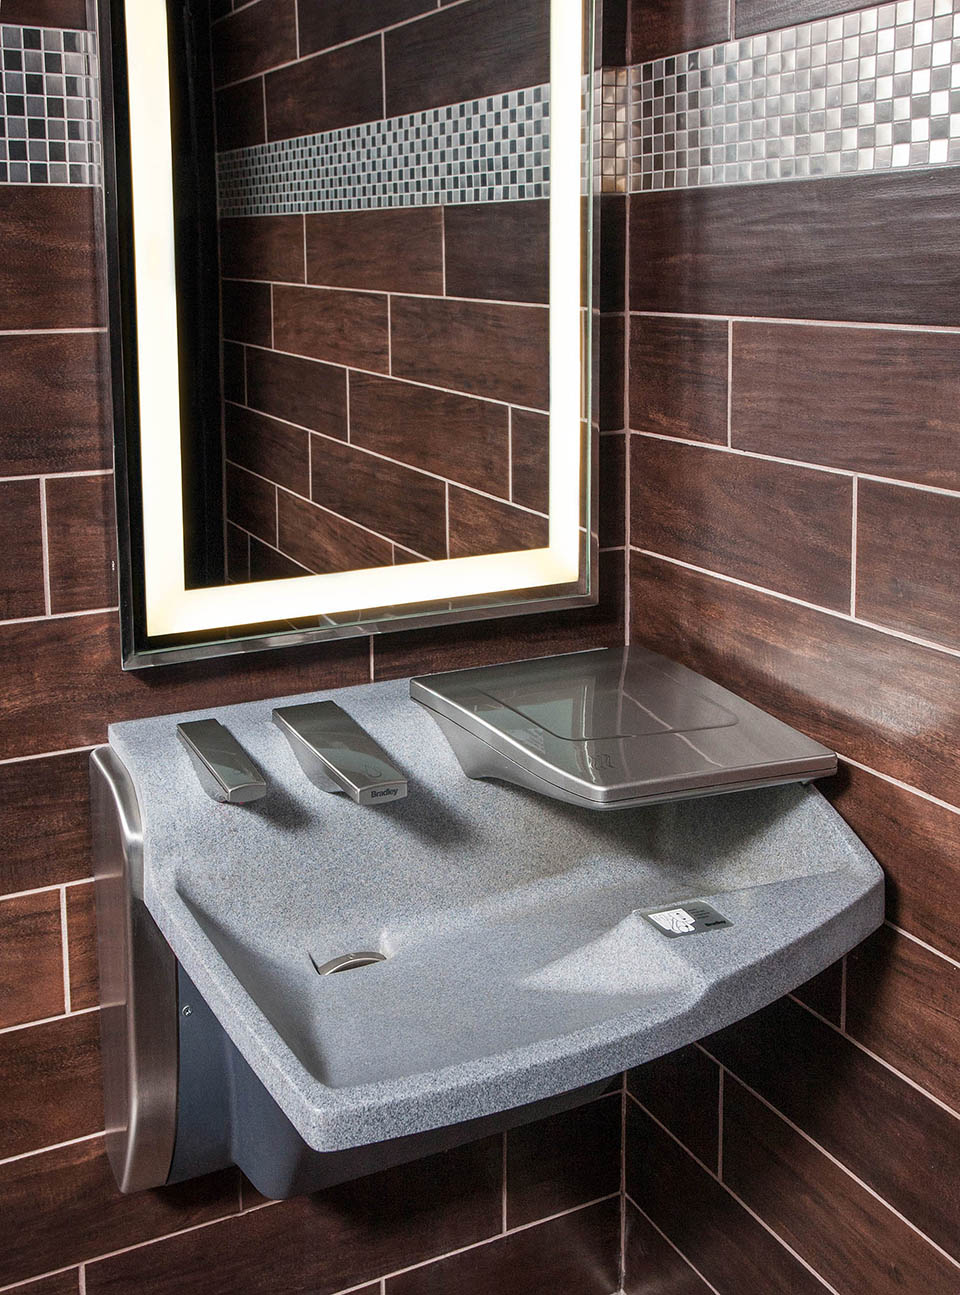 3-in-1 Advocate AV-series sink with co-located soap water and hand drying - shown as single station in a dark restroom